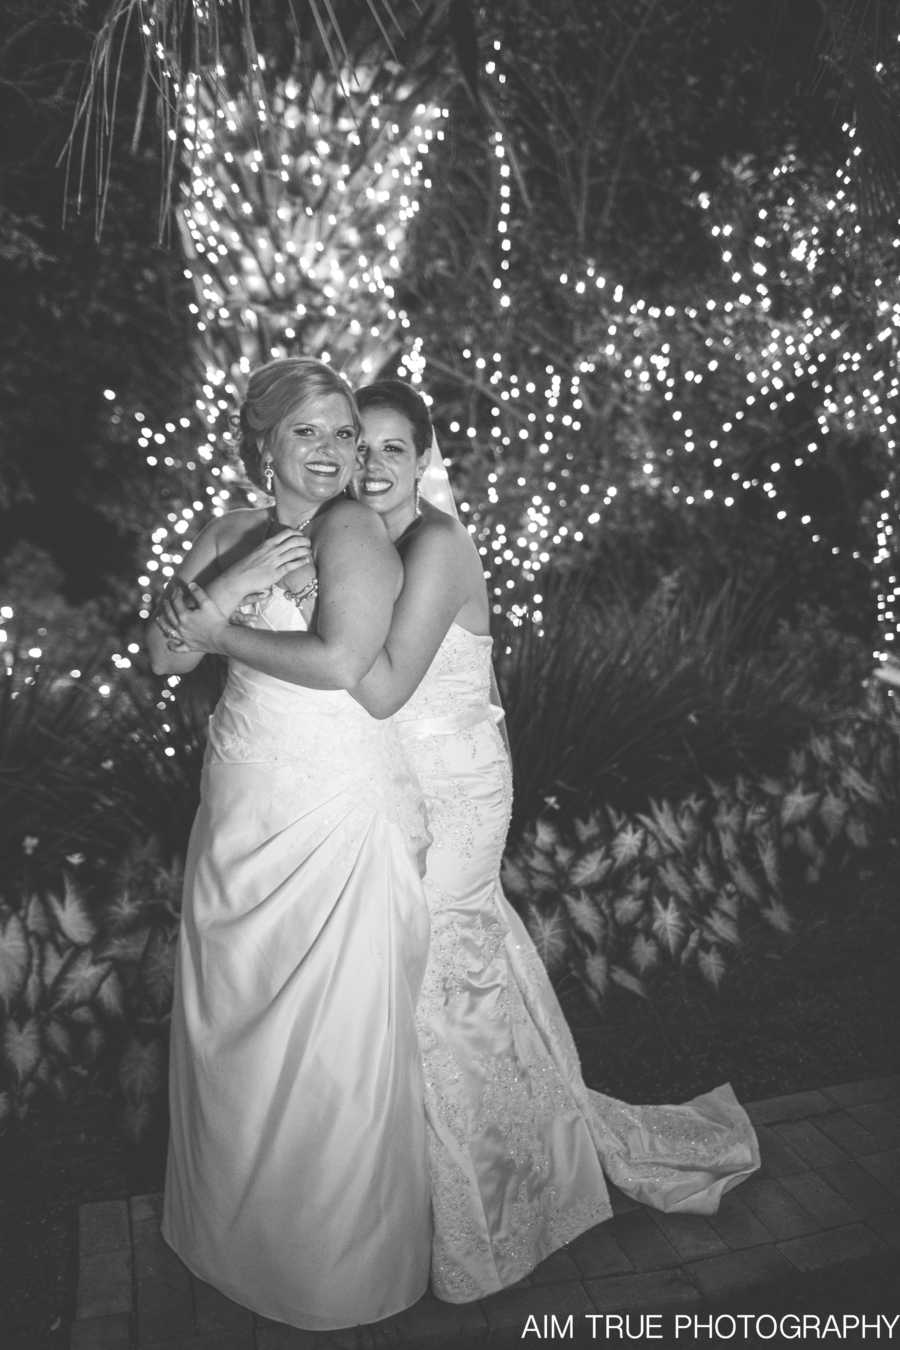 Wives hugging each other on their wedding day in wedding gowns beside tree wrapped in lights